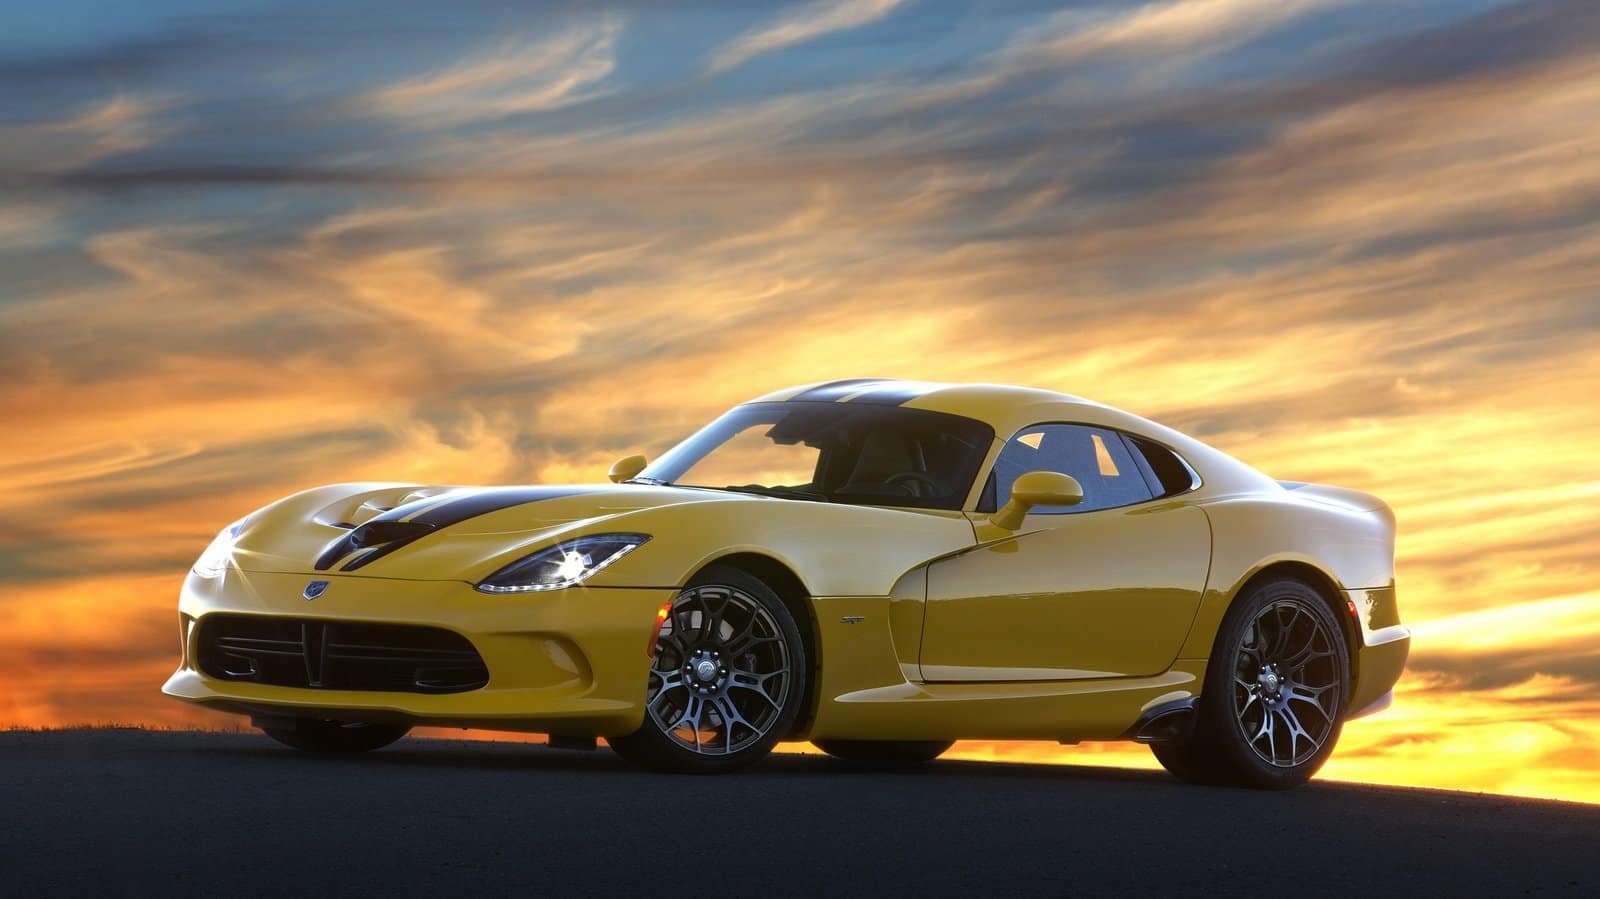 New Dodge Viper Coming in 2021